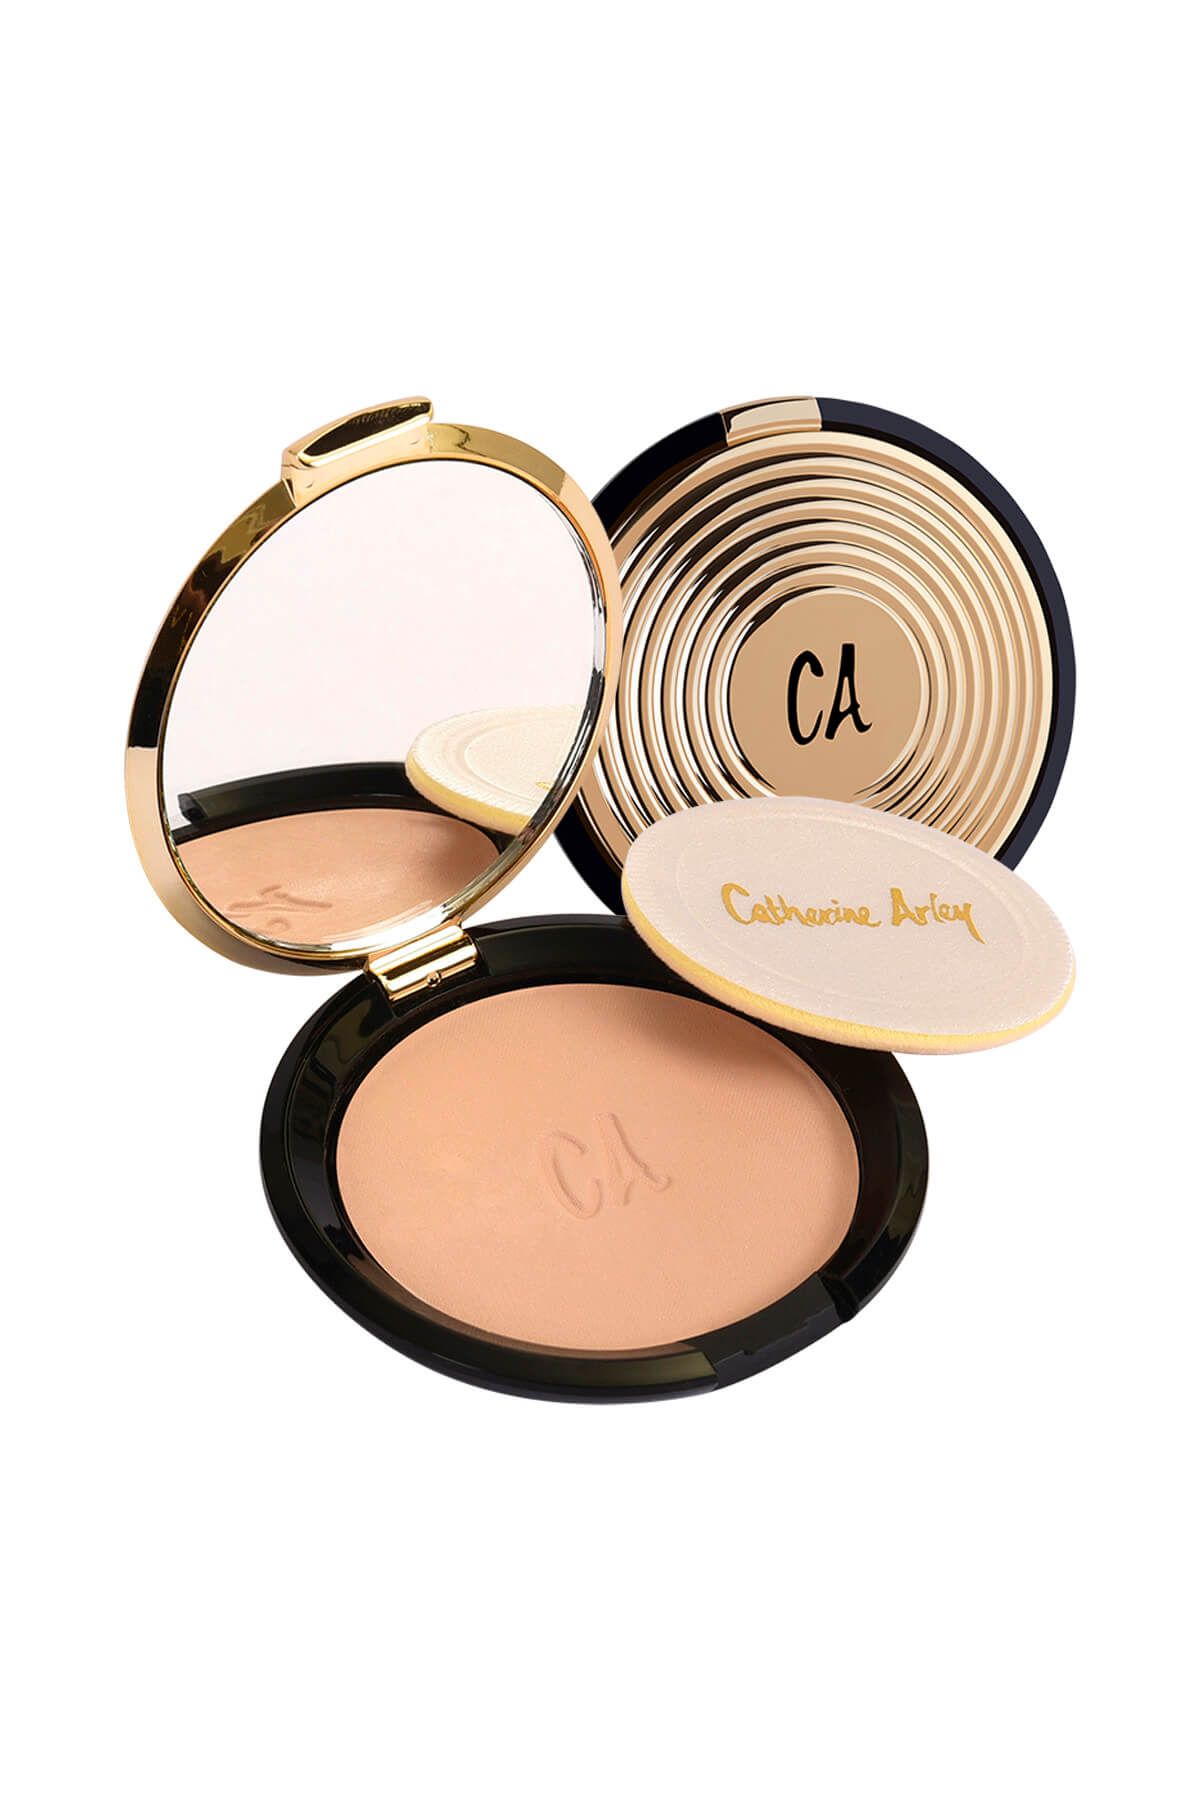 Catherine Arley Gold Pudra - Gold Compact Powder 102 8691167474838